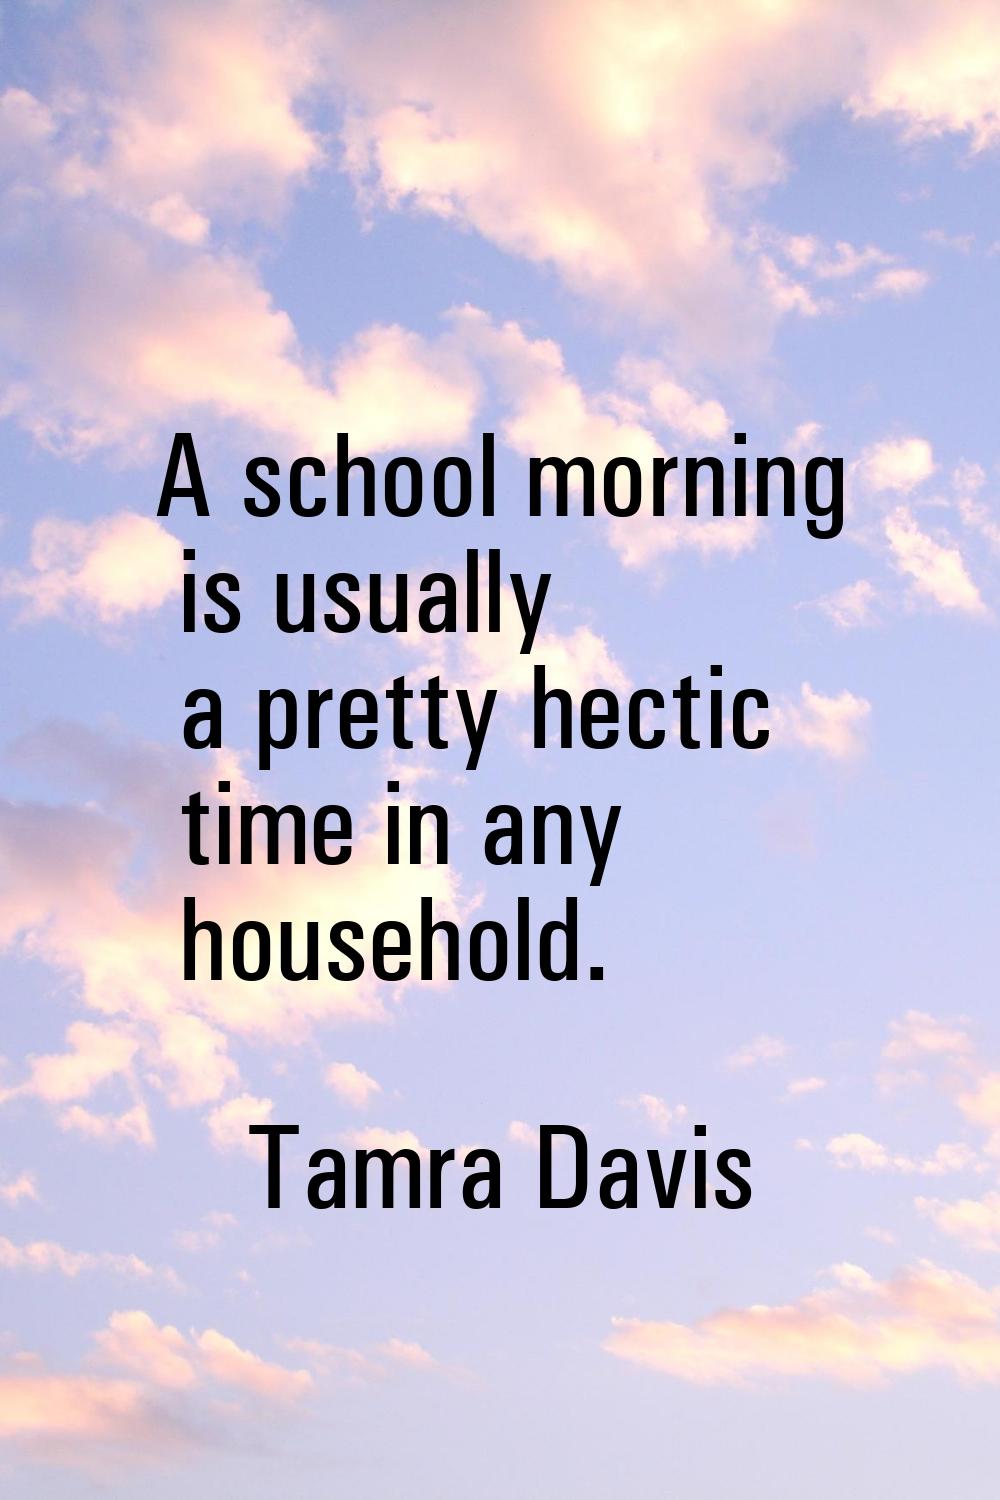 A school morning is usually a pretty hectic time in any household.